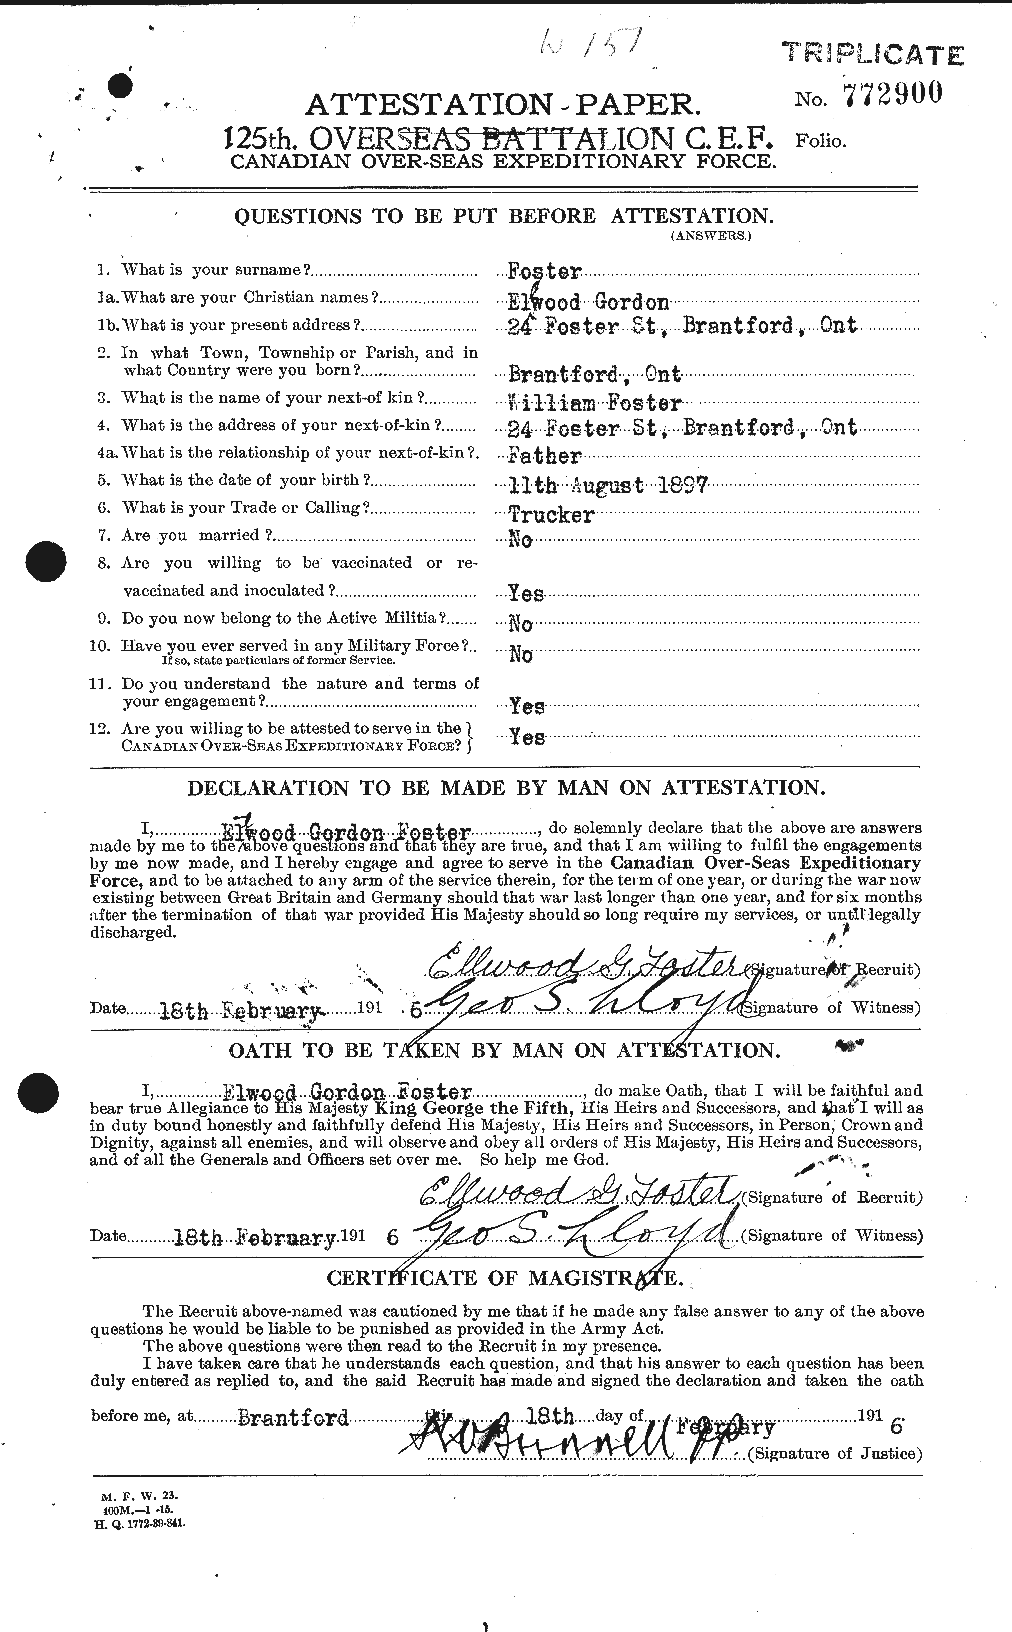 Personnel Records of the First World War - CEF 330597a